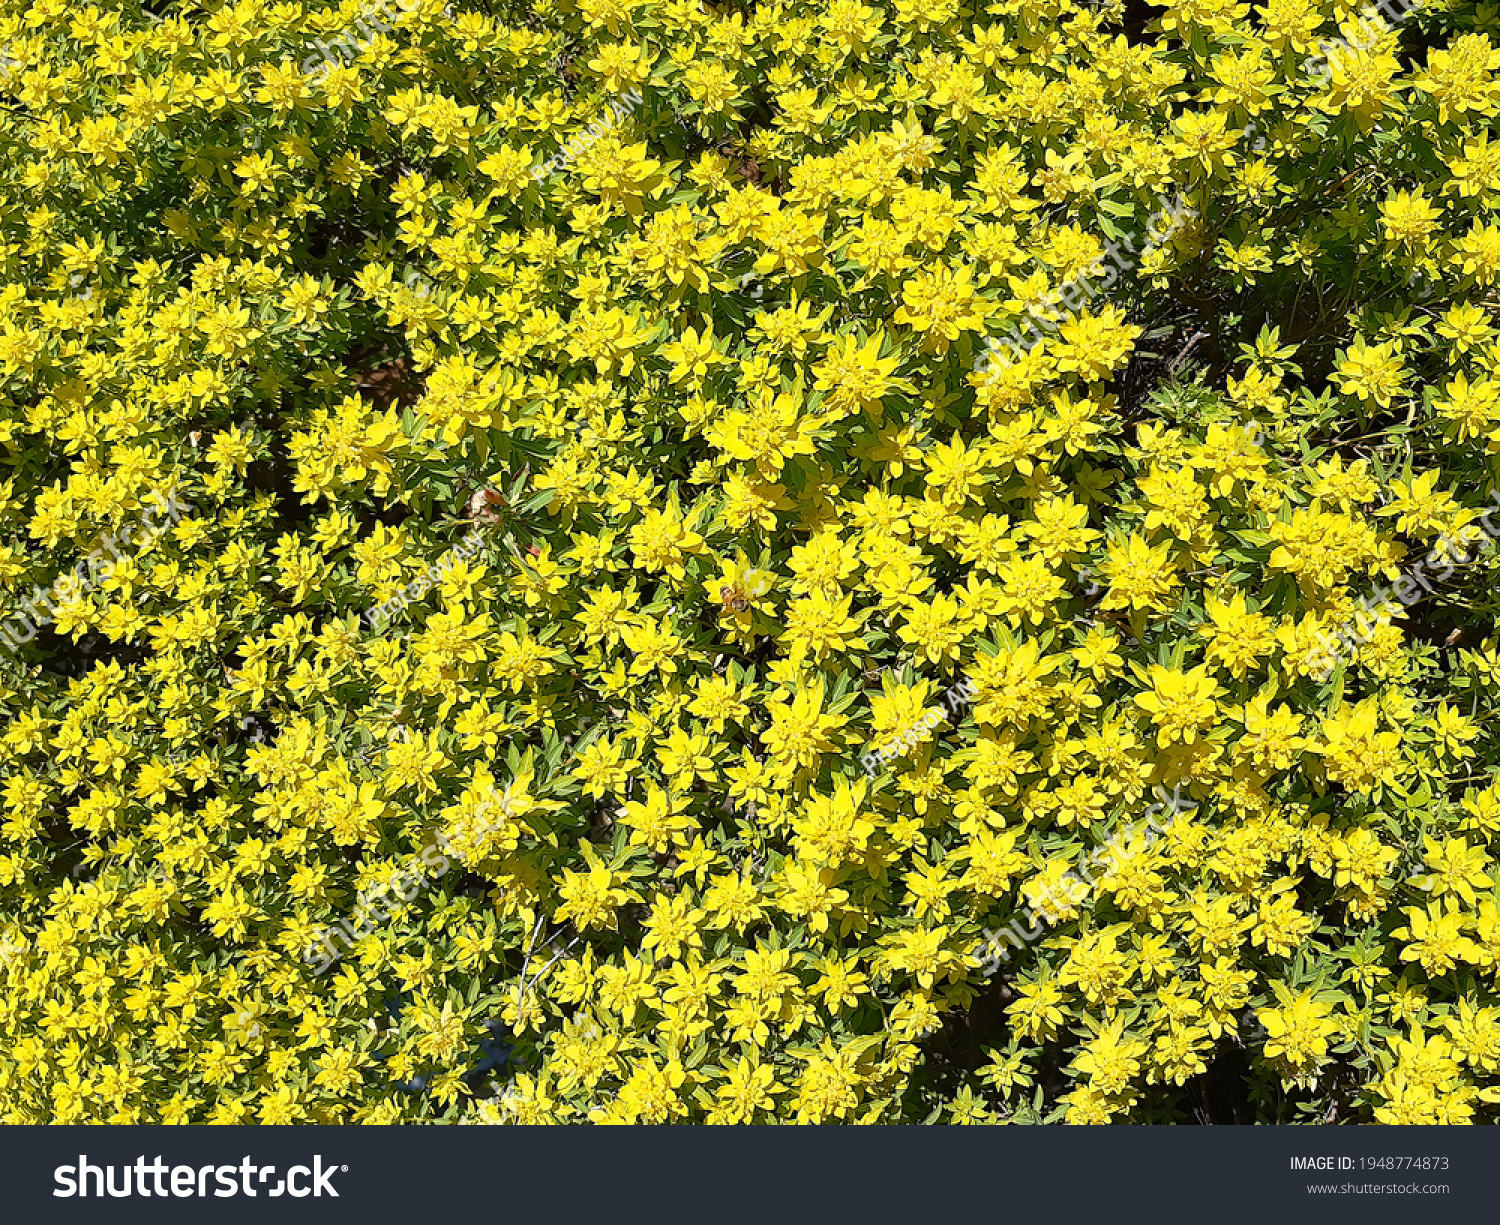 Green - yellow flowering plant  in wild nature on sunny day. Jerusalem Spurge or Woody Spurge plant, Euphorbia hierosolymitana producing milky juice upon it injury. Natural background #1948774873